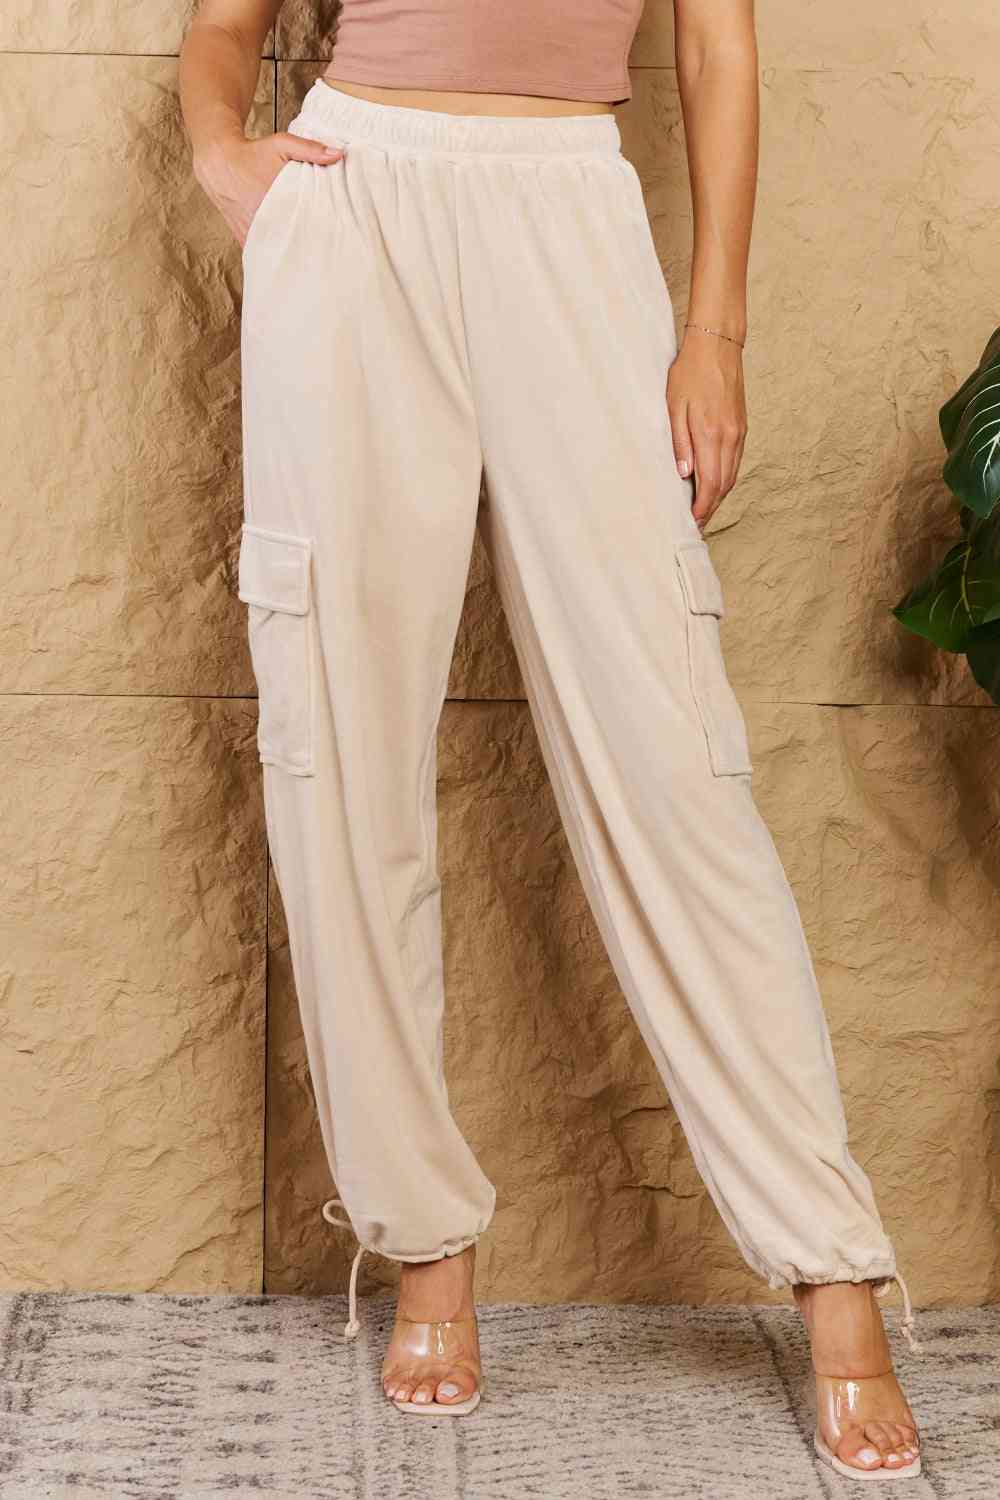 HYFVE Chic For Days High Waist Drawstring Cargo Pants in Ivory Ivory